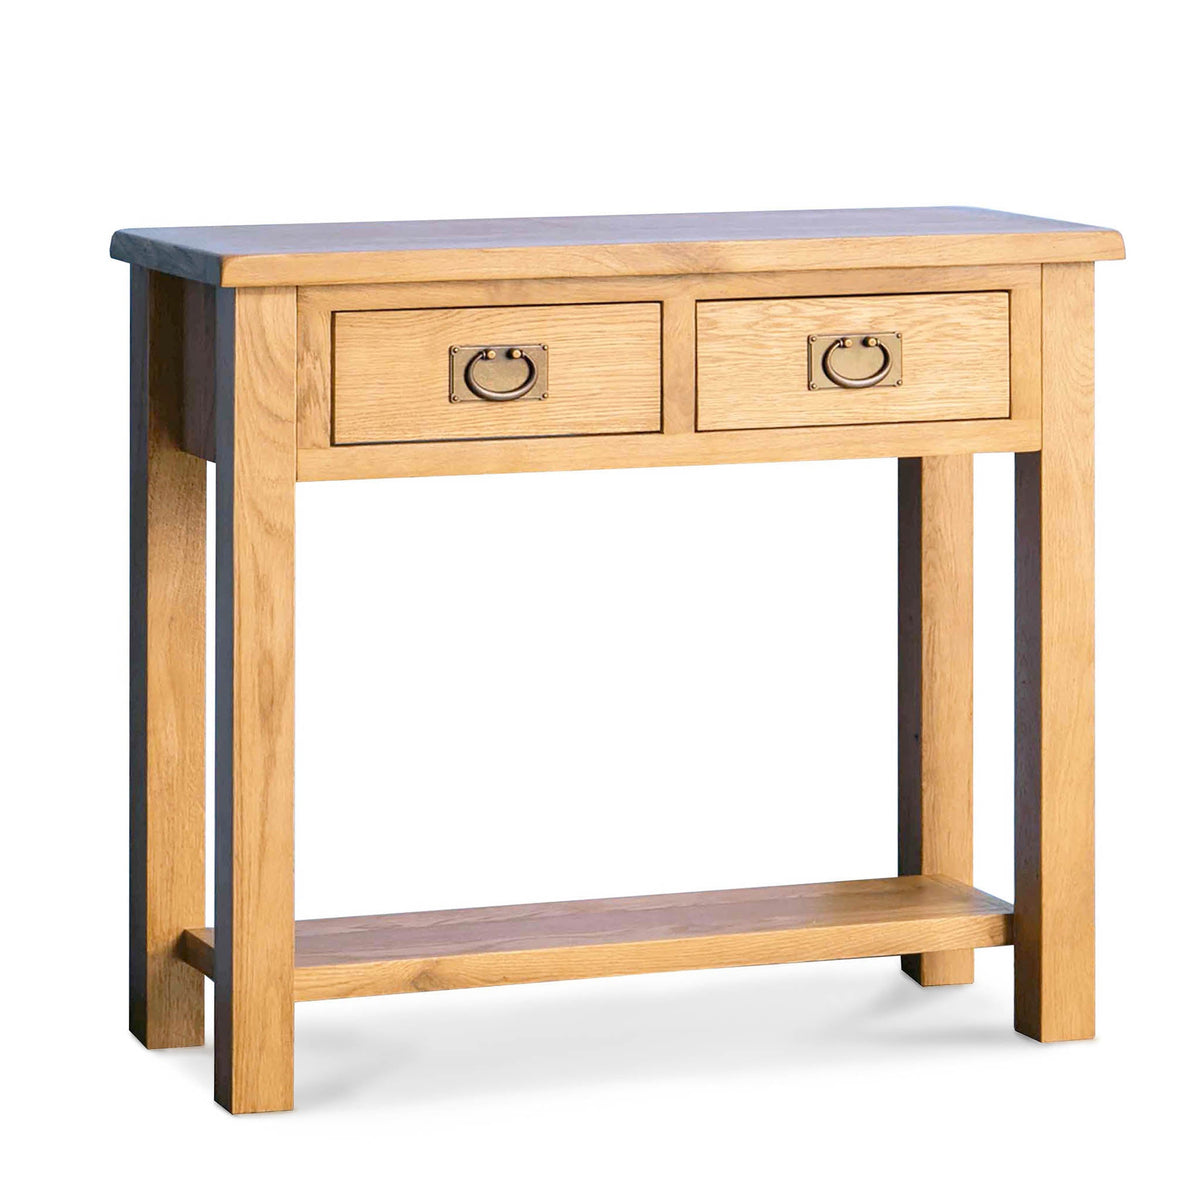 Surrey Oak Console Table by Roseland Furniture